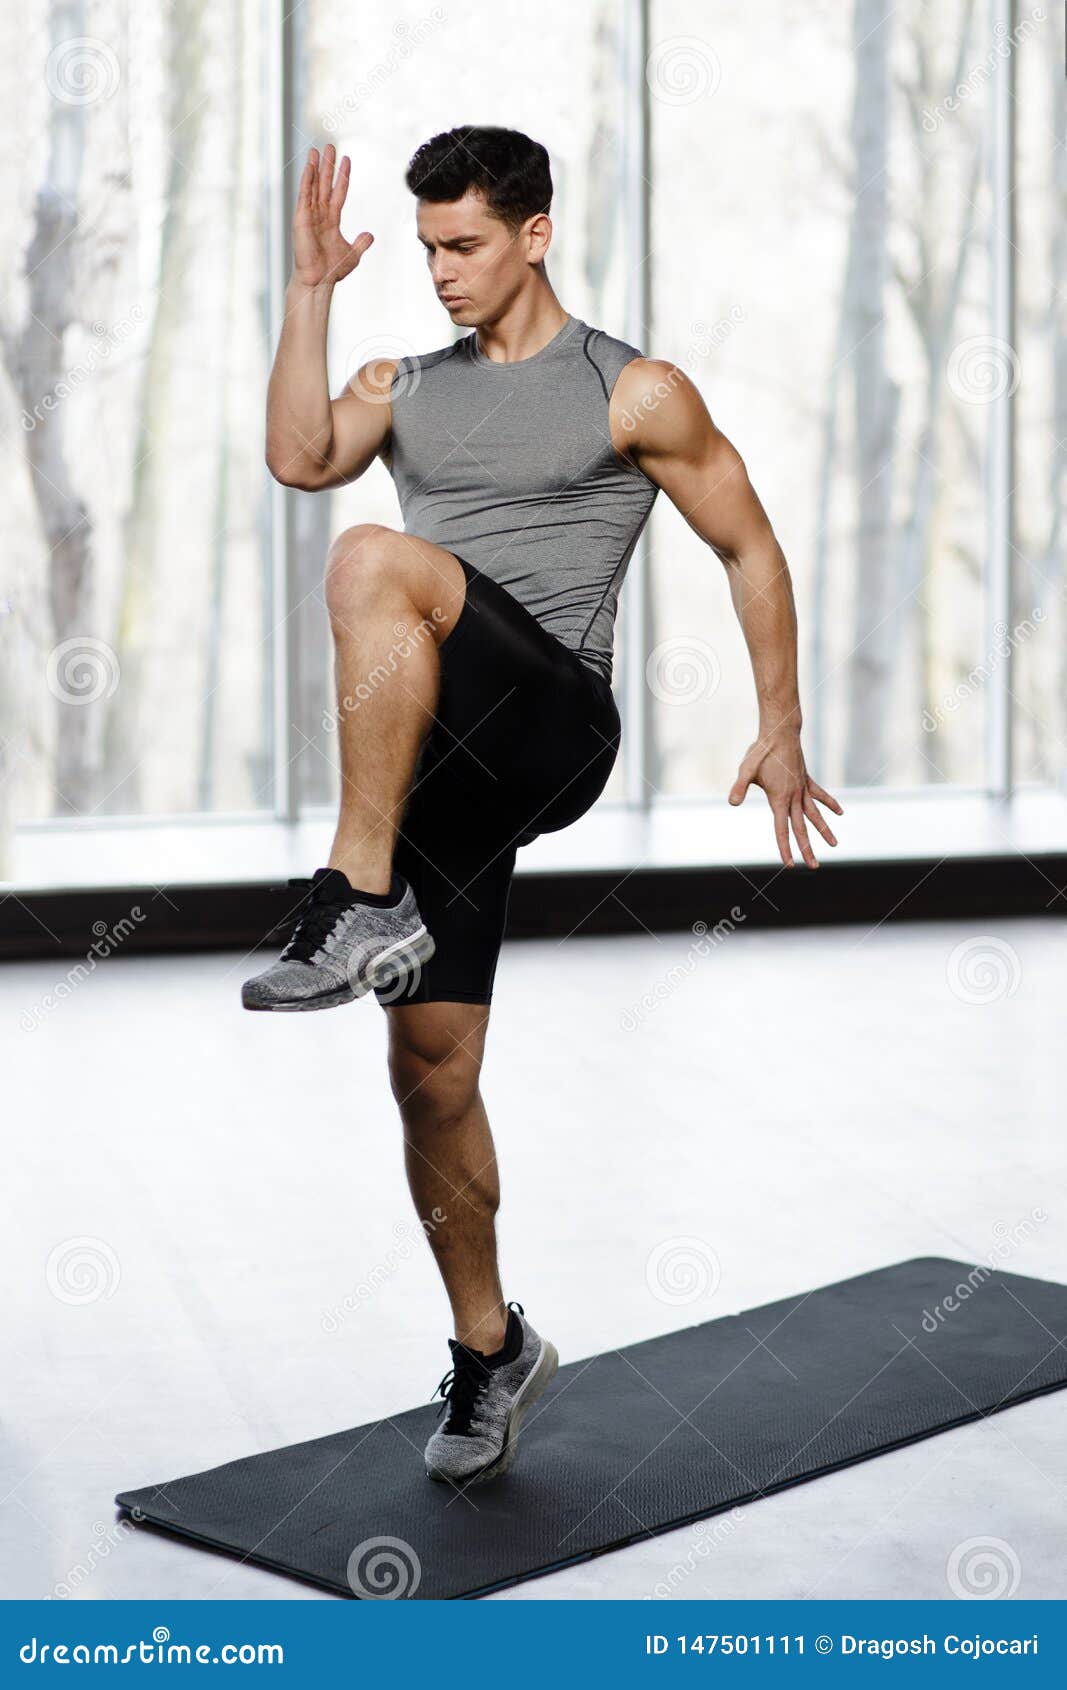 Fit, Athletic Male Model in Sportswear Doing Strength Exercise with Knee Up  in Gym, Isolated on a Big Window Background. Stock Image - Image of athlete,  indoors: 147501111